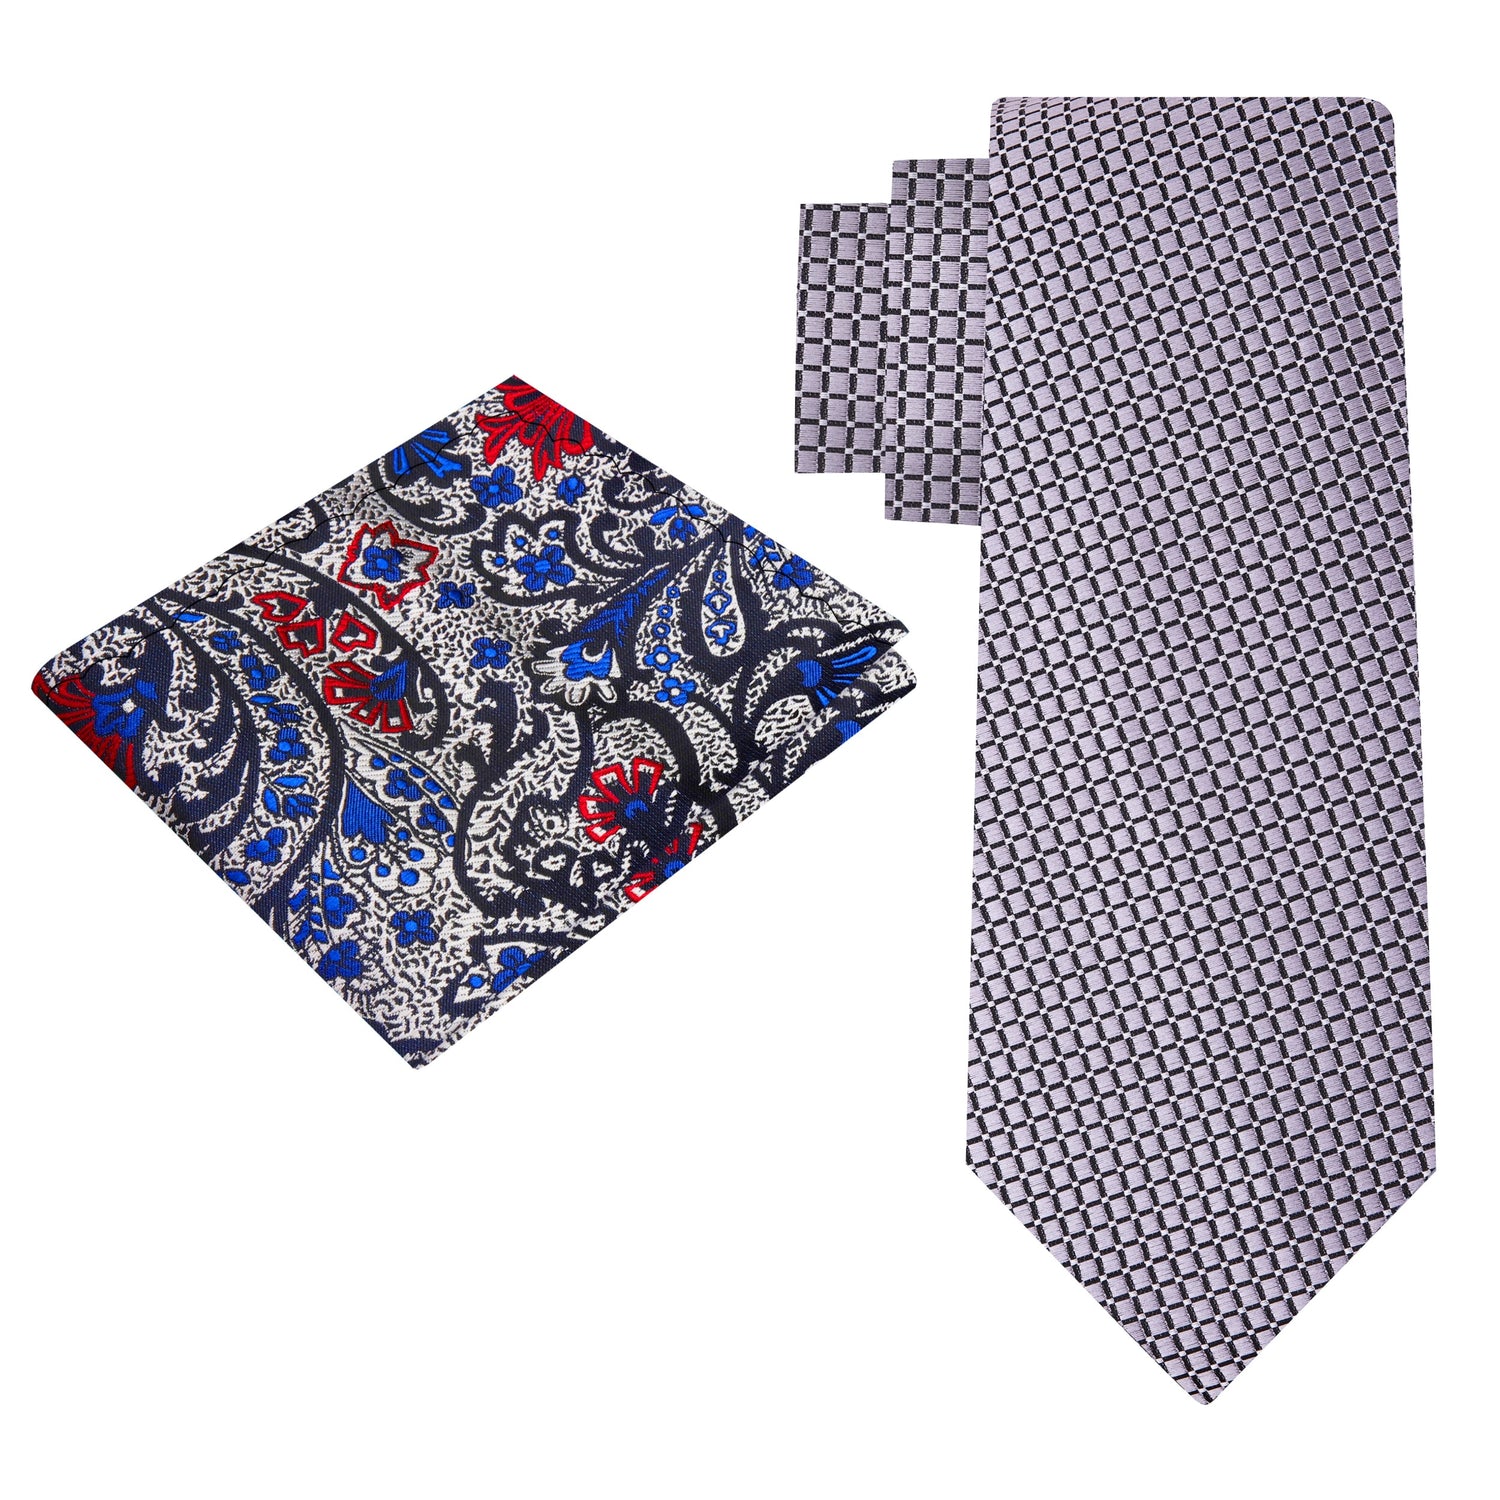 Alt View: Metallic Silver Geometric Tie and Accenting Silver, Black, Blue, Red Paisley Square